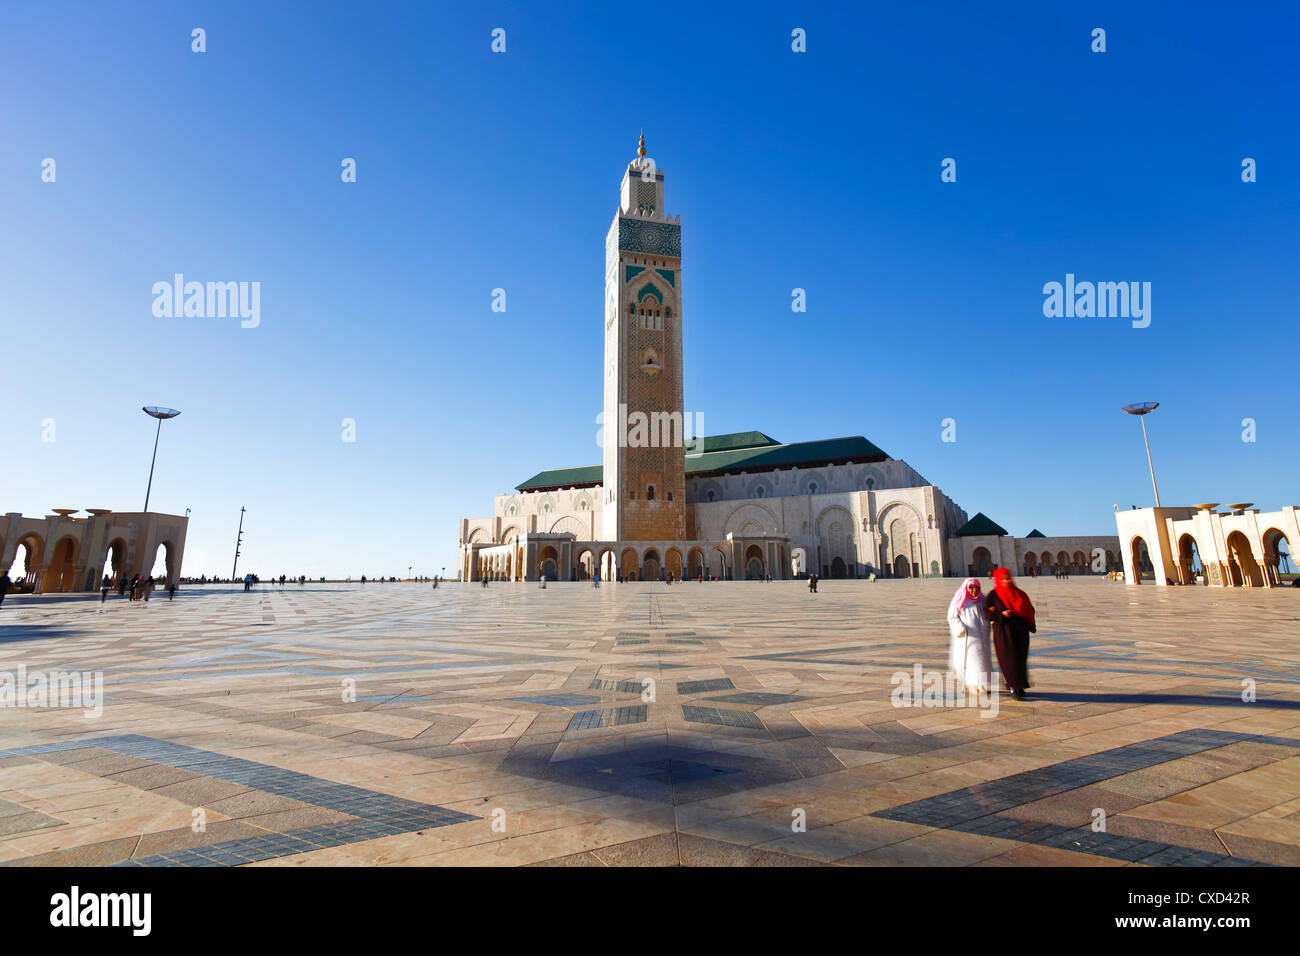 Hassan II Mosque, the third largest mosque in the world, Casablanca, Morocco, North Africa, Africa Stock Photo